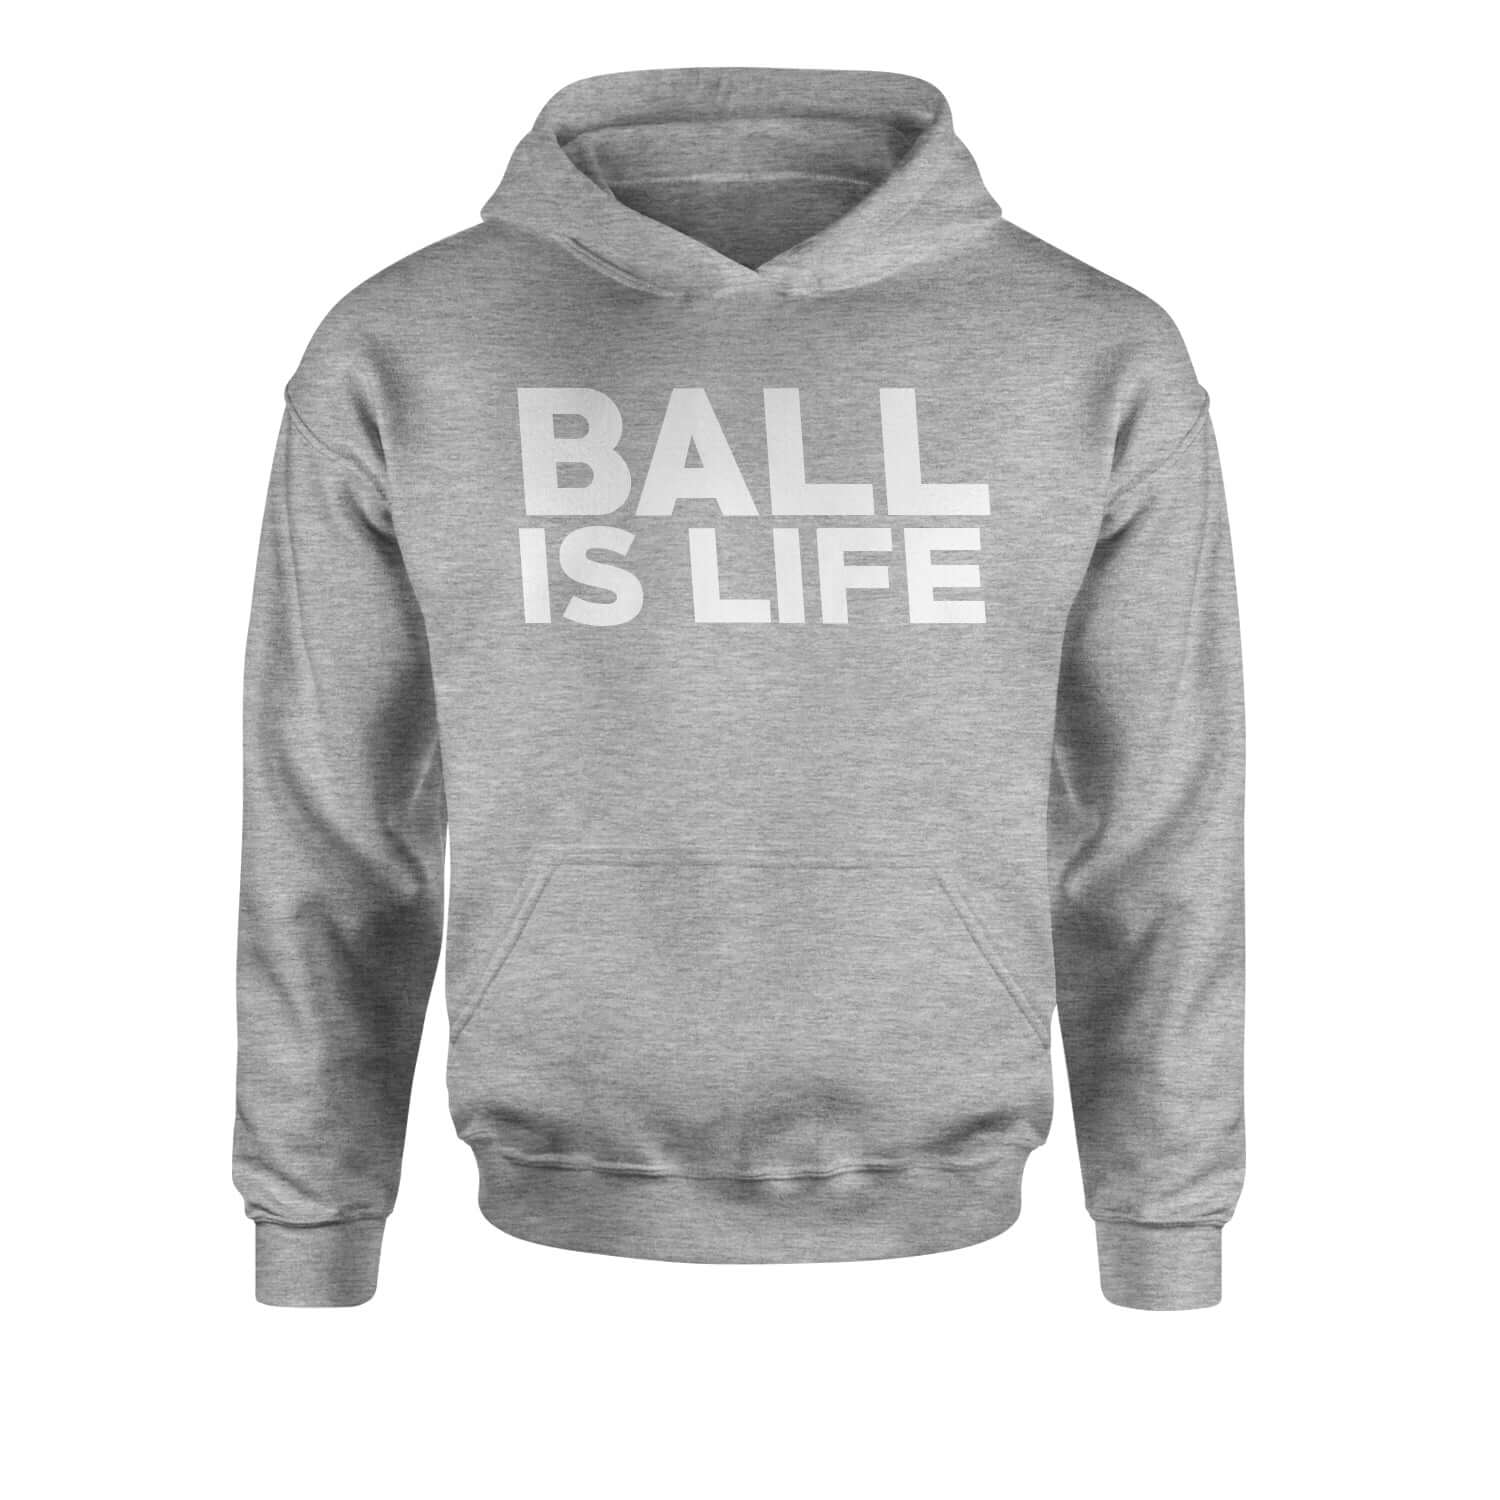 Ball Is Life Youth-Sized Hoodie baseball, basketball, football by Expression Tees